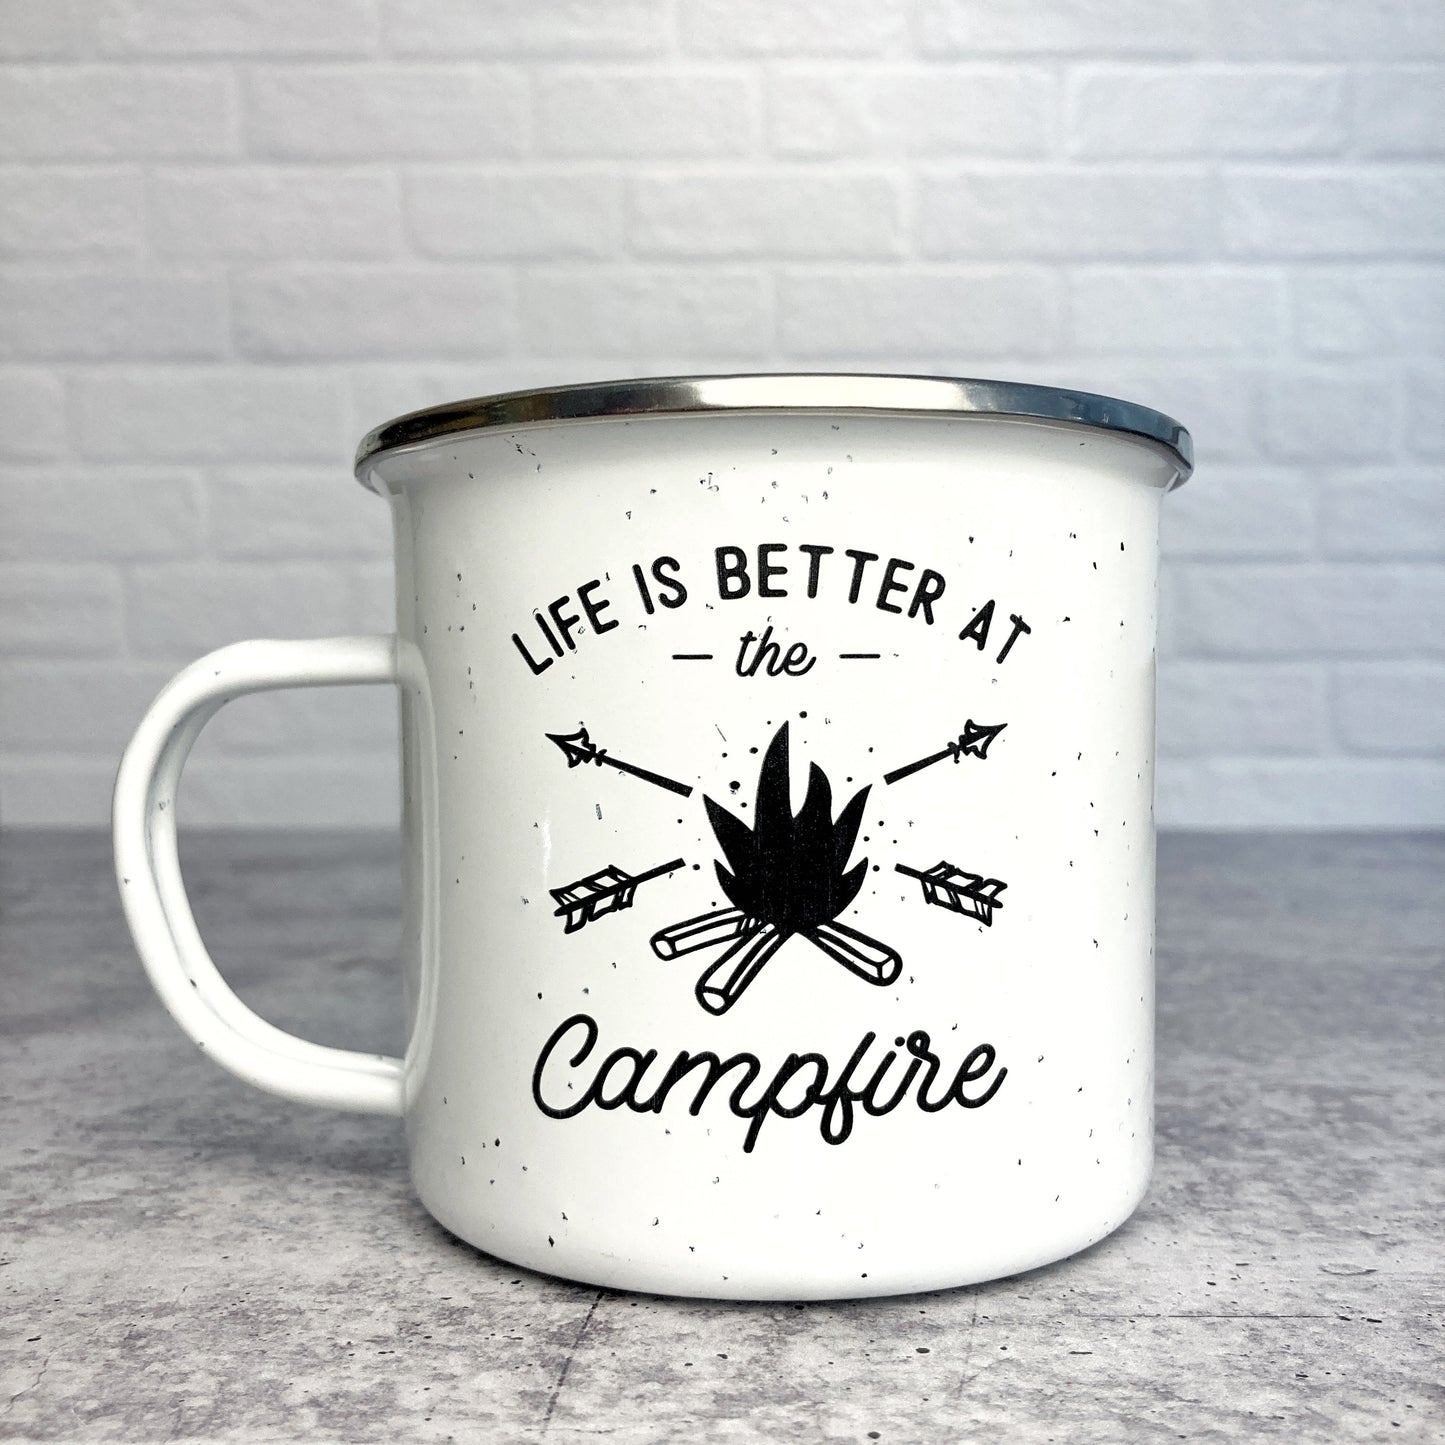 Life Is Better at the Campfire Design on a white enamel mug